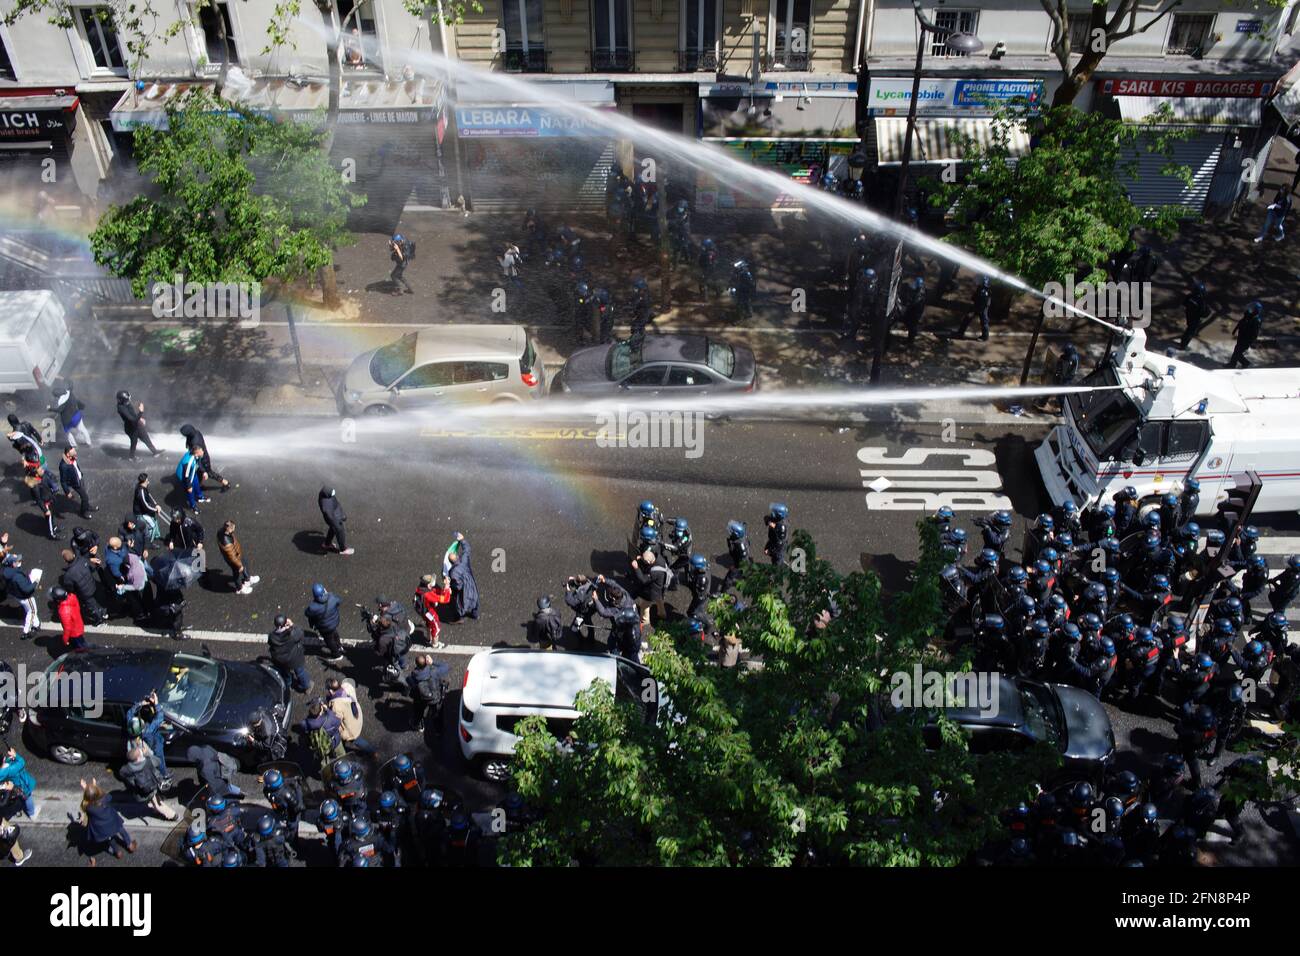 Police fire water cannon to disperse Palestine supporters gathered at Pro-Palestinian demonstration, Boulevard Barbès, Paris, France, May 15th, 2021 Stock Photo